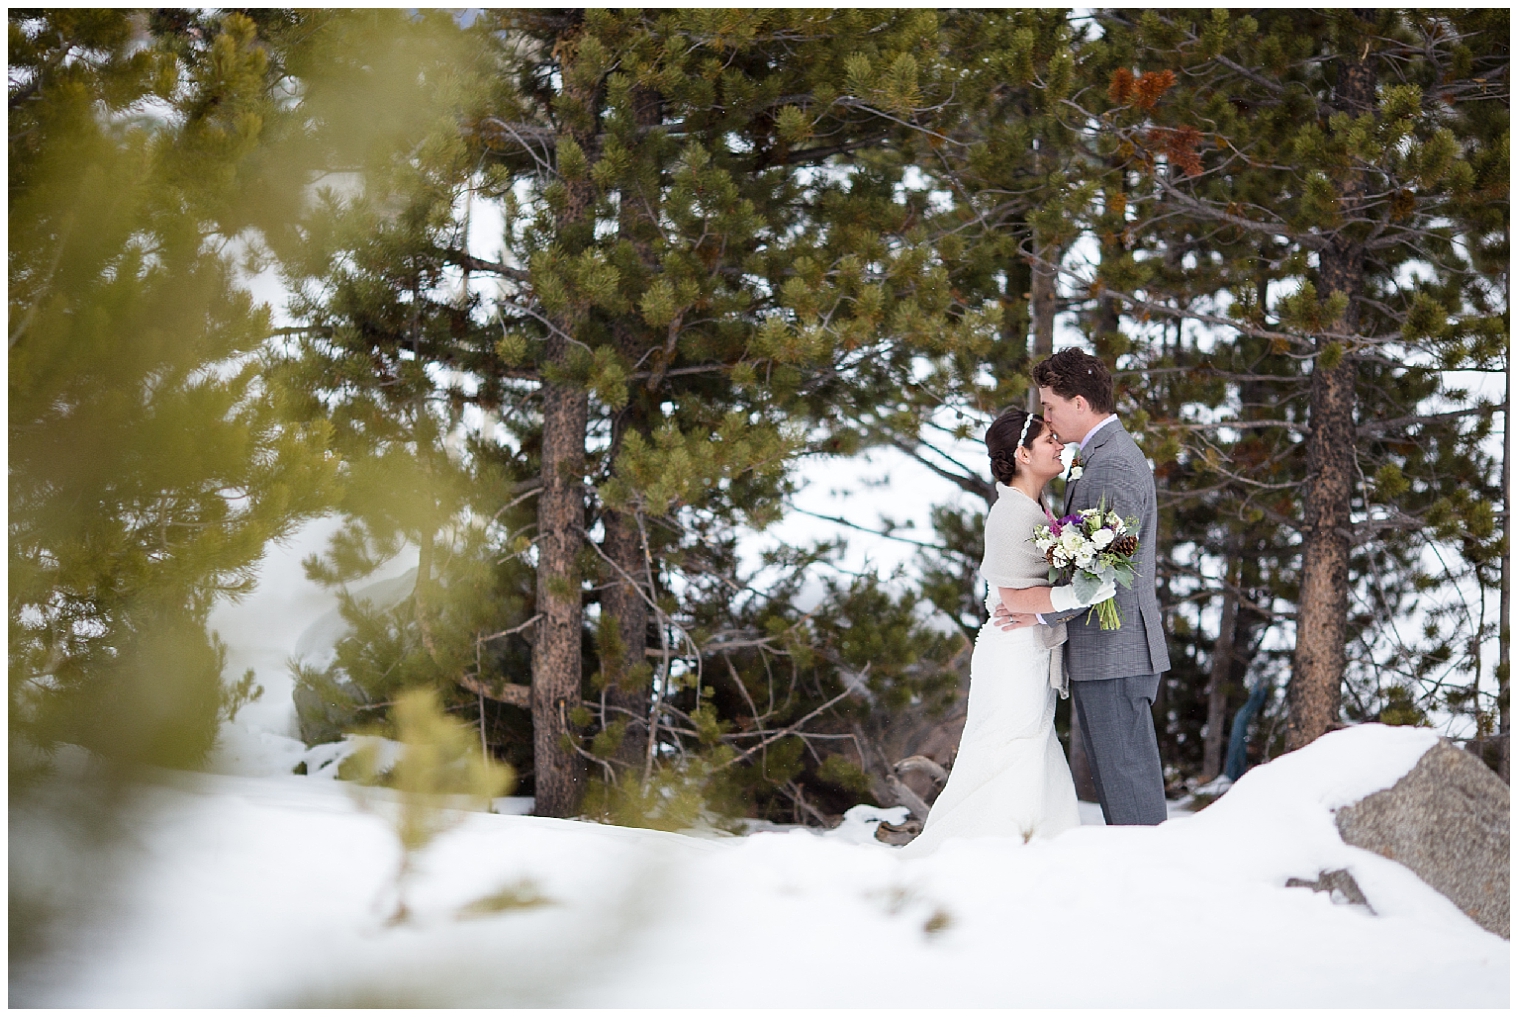 Bride and groom embrace in the snow at their Breckenridge elopement.